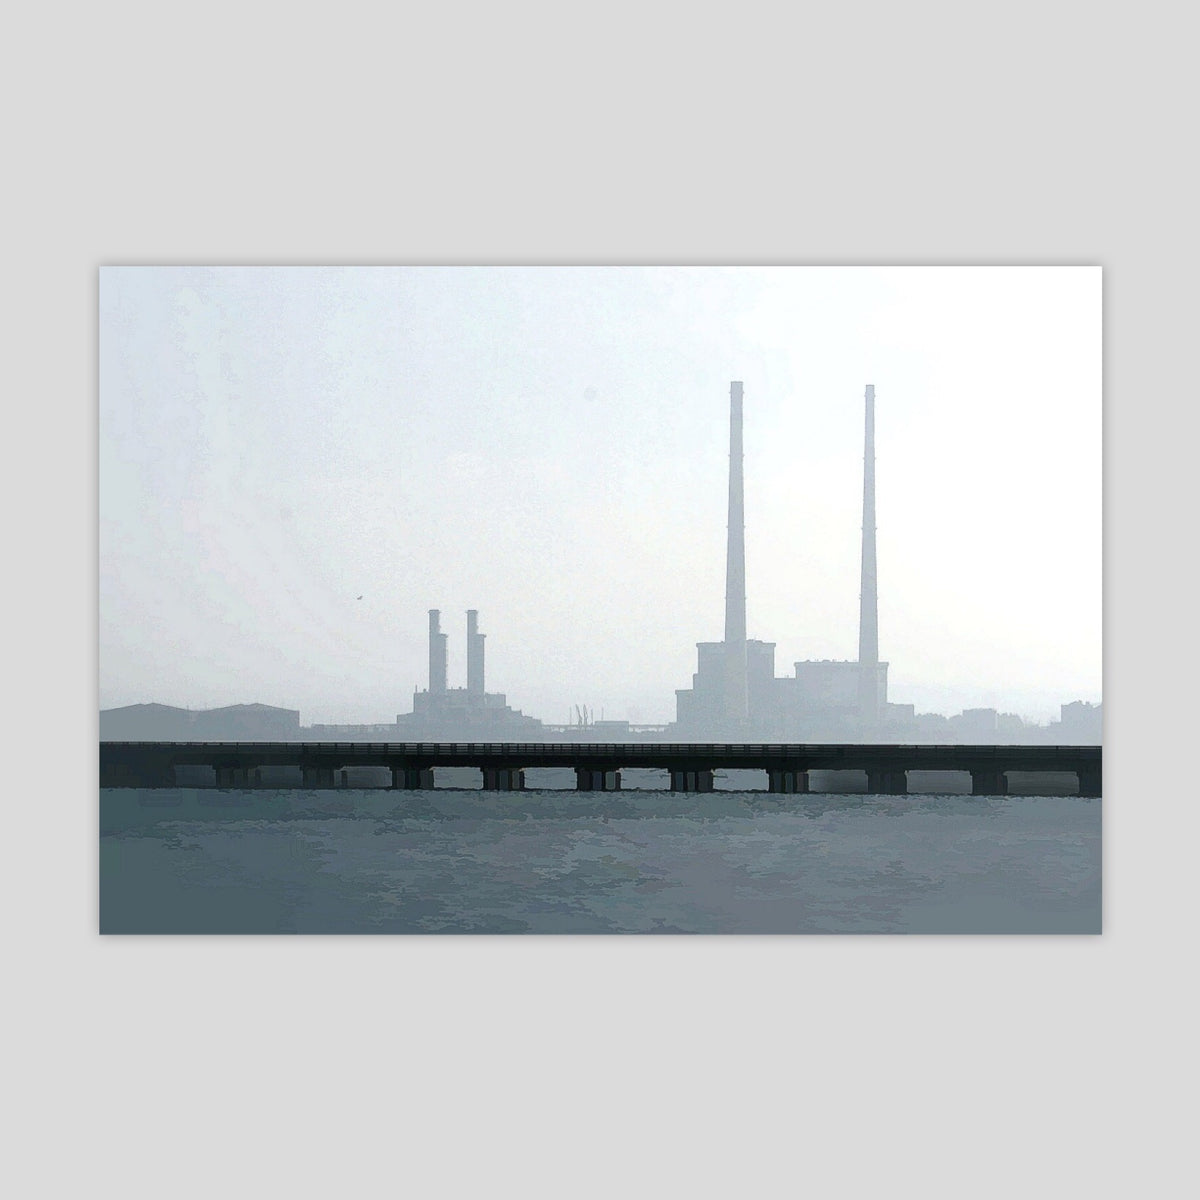 Poolbeg from Dollymount (3041R)